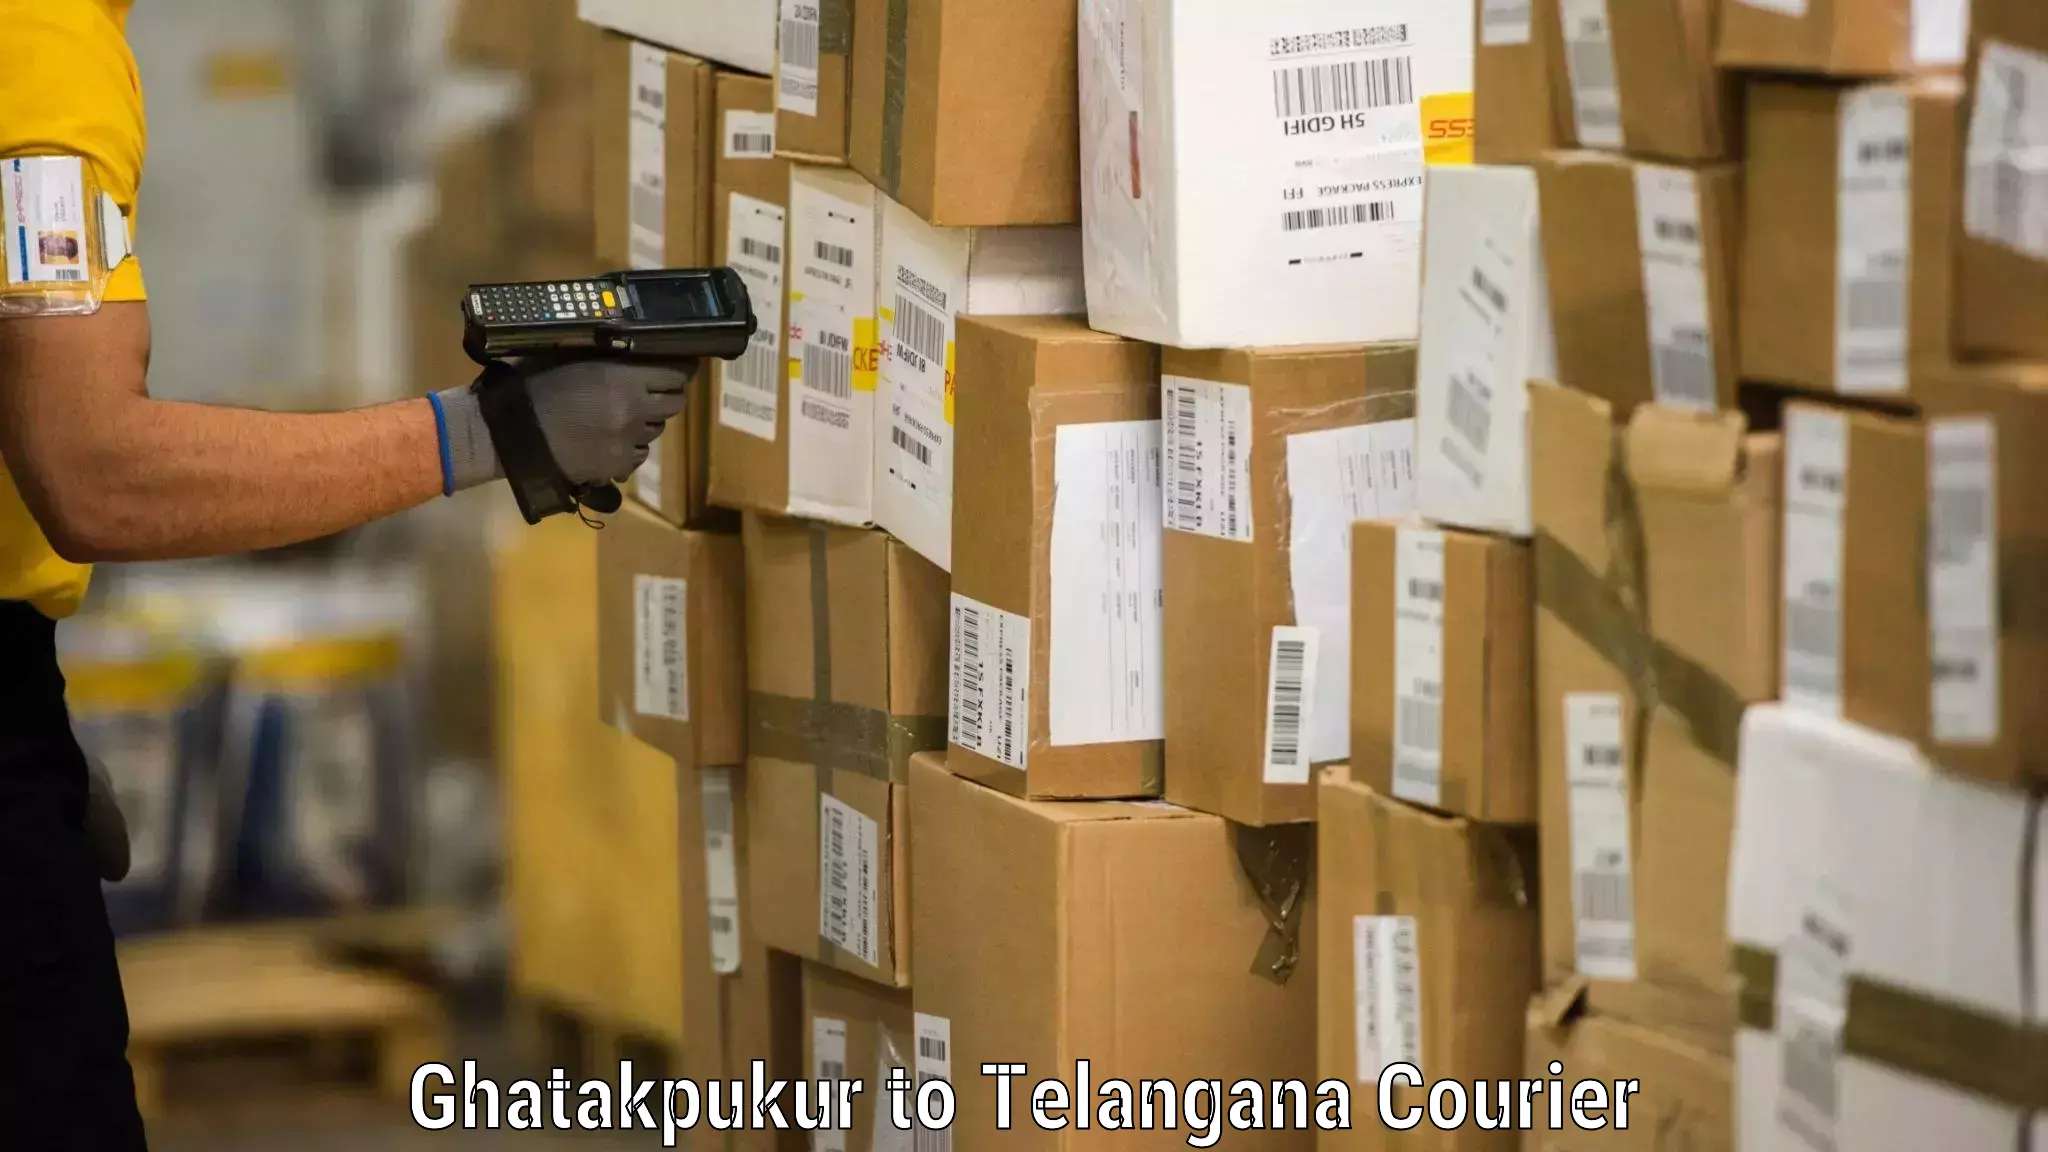 Furniture delivery service Ghatakpukur to Telangana